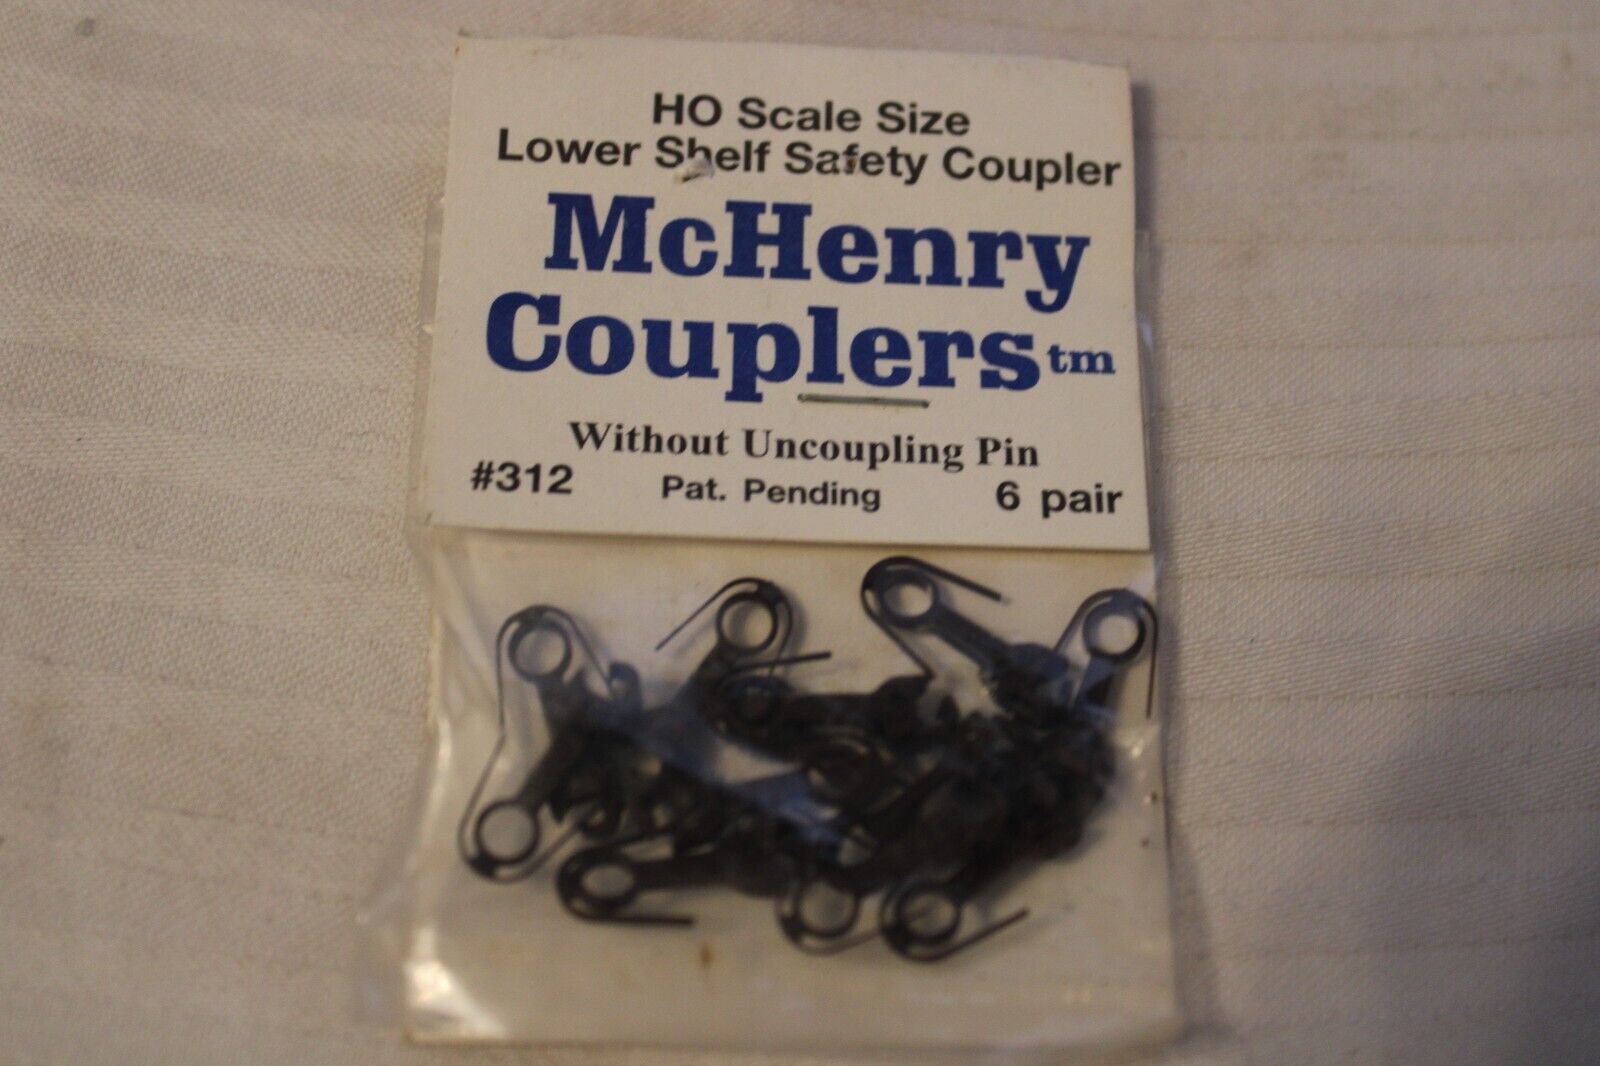 HO Scale McHenry Couplers, Package of 12, #312 Couplers without uncoupling pins